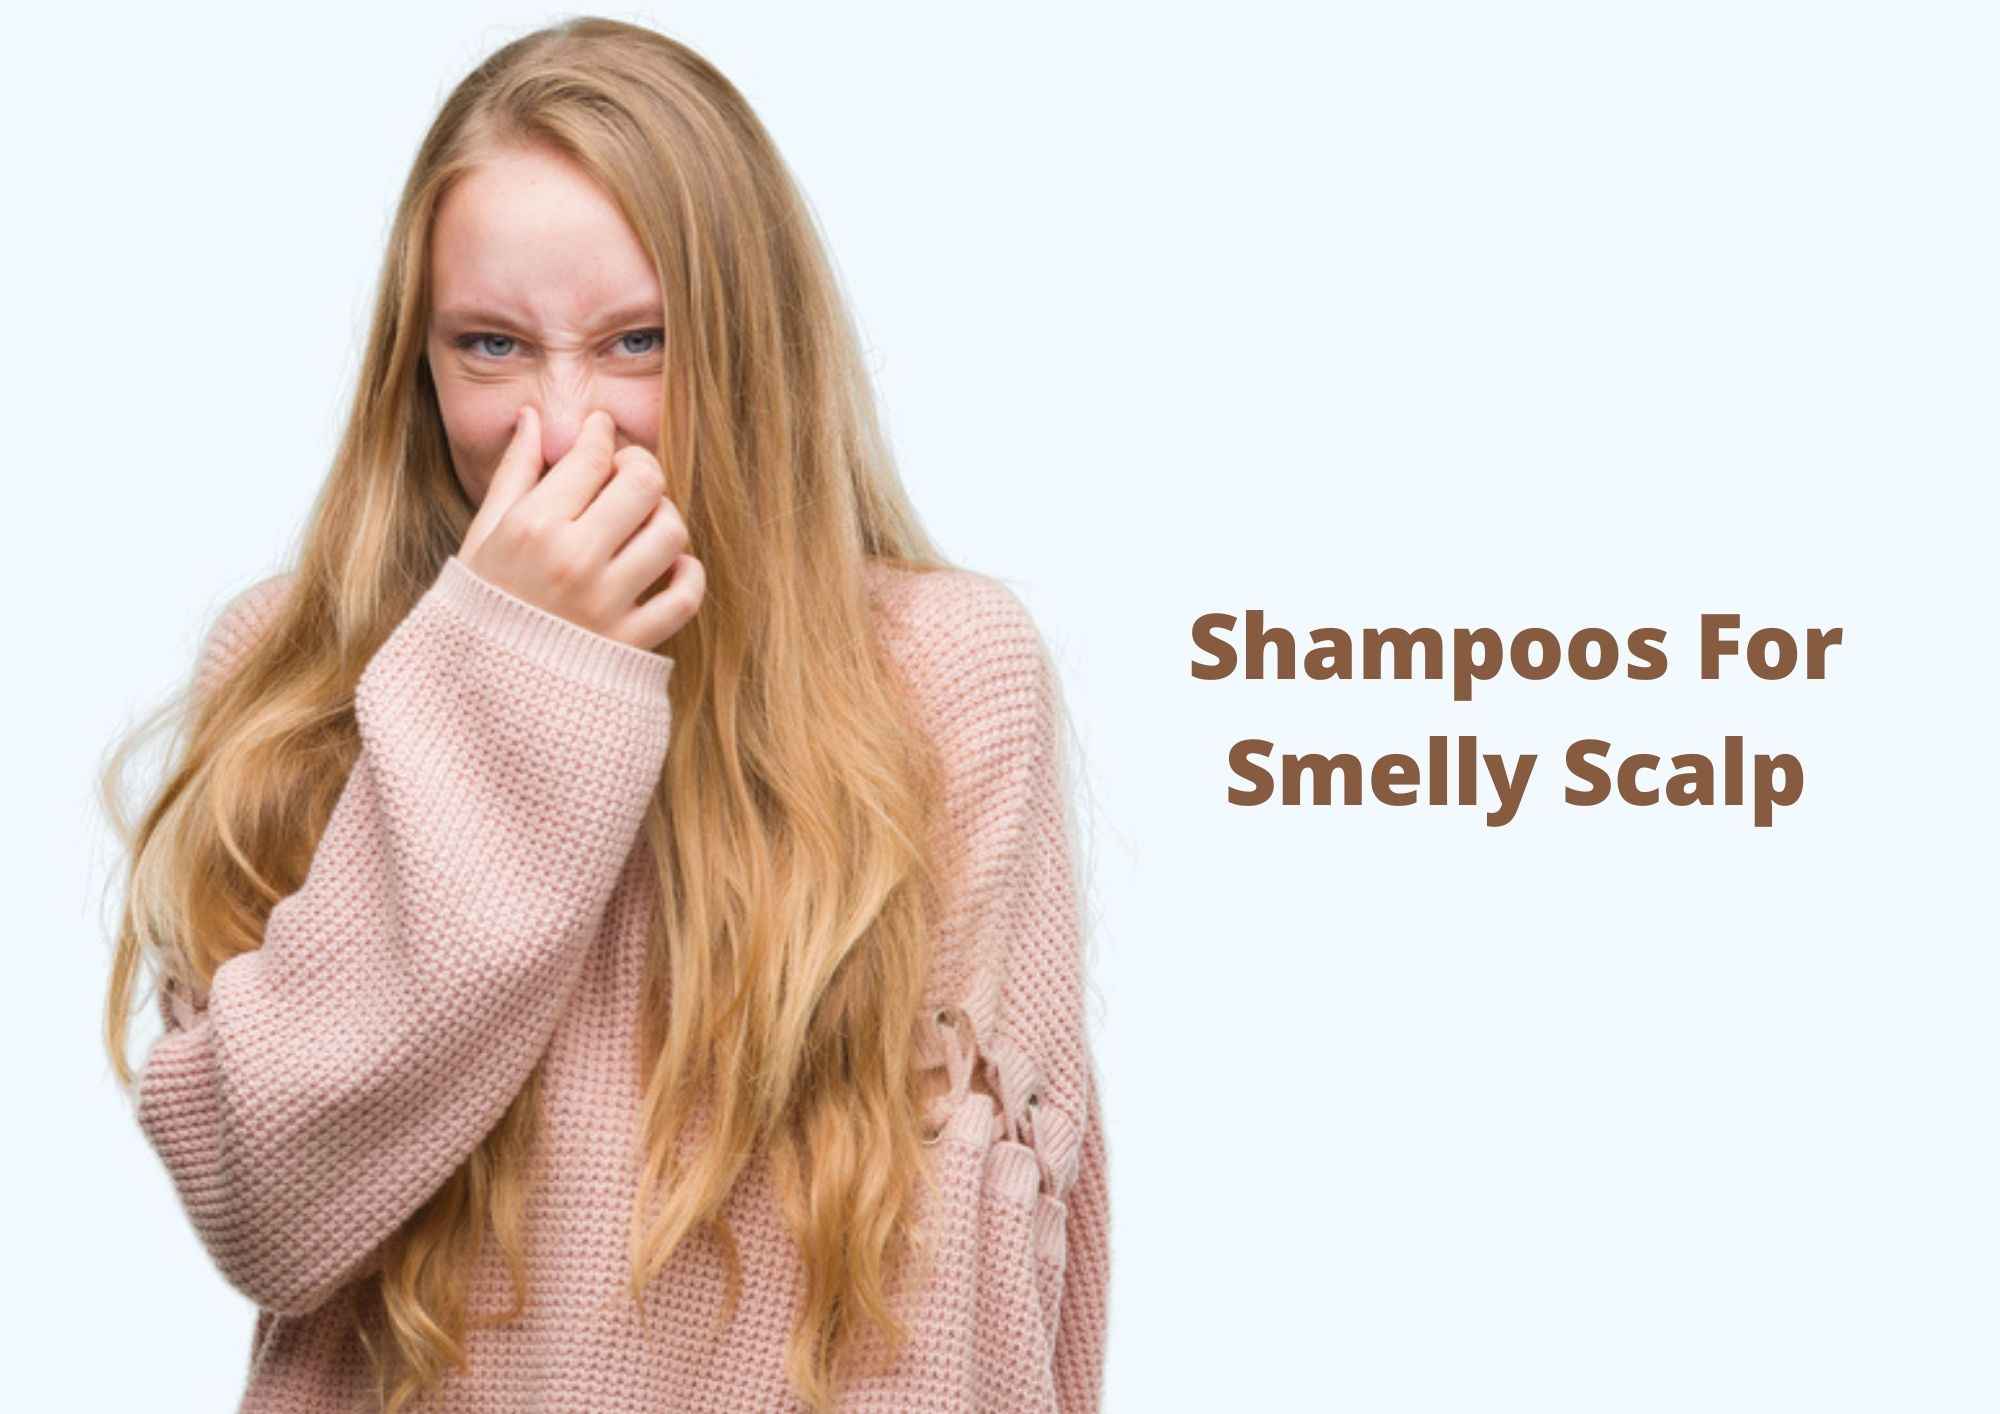 6 Best Shampoos For Smelly Hair and Scalp 2022